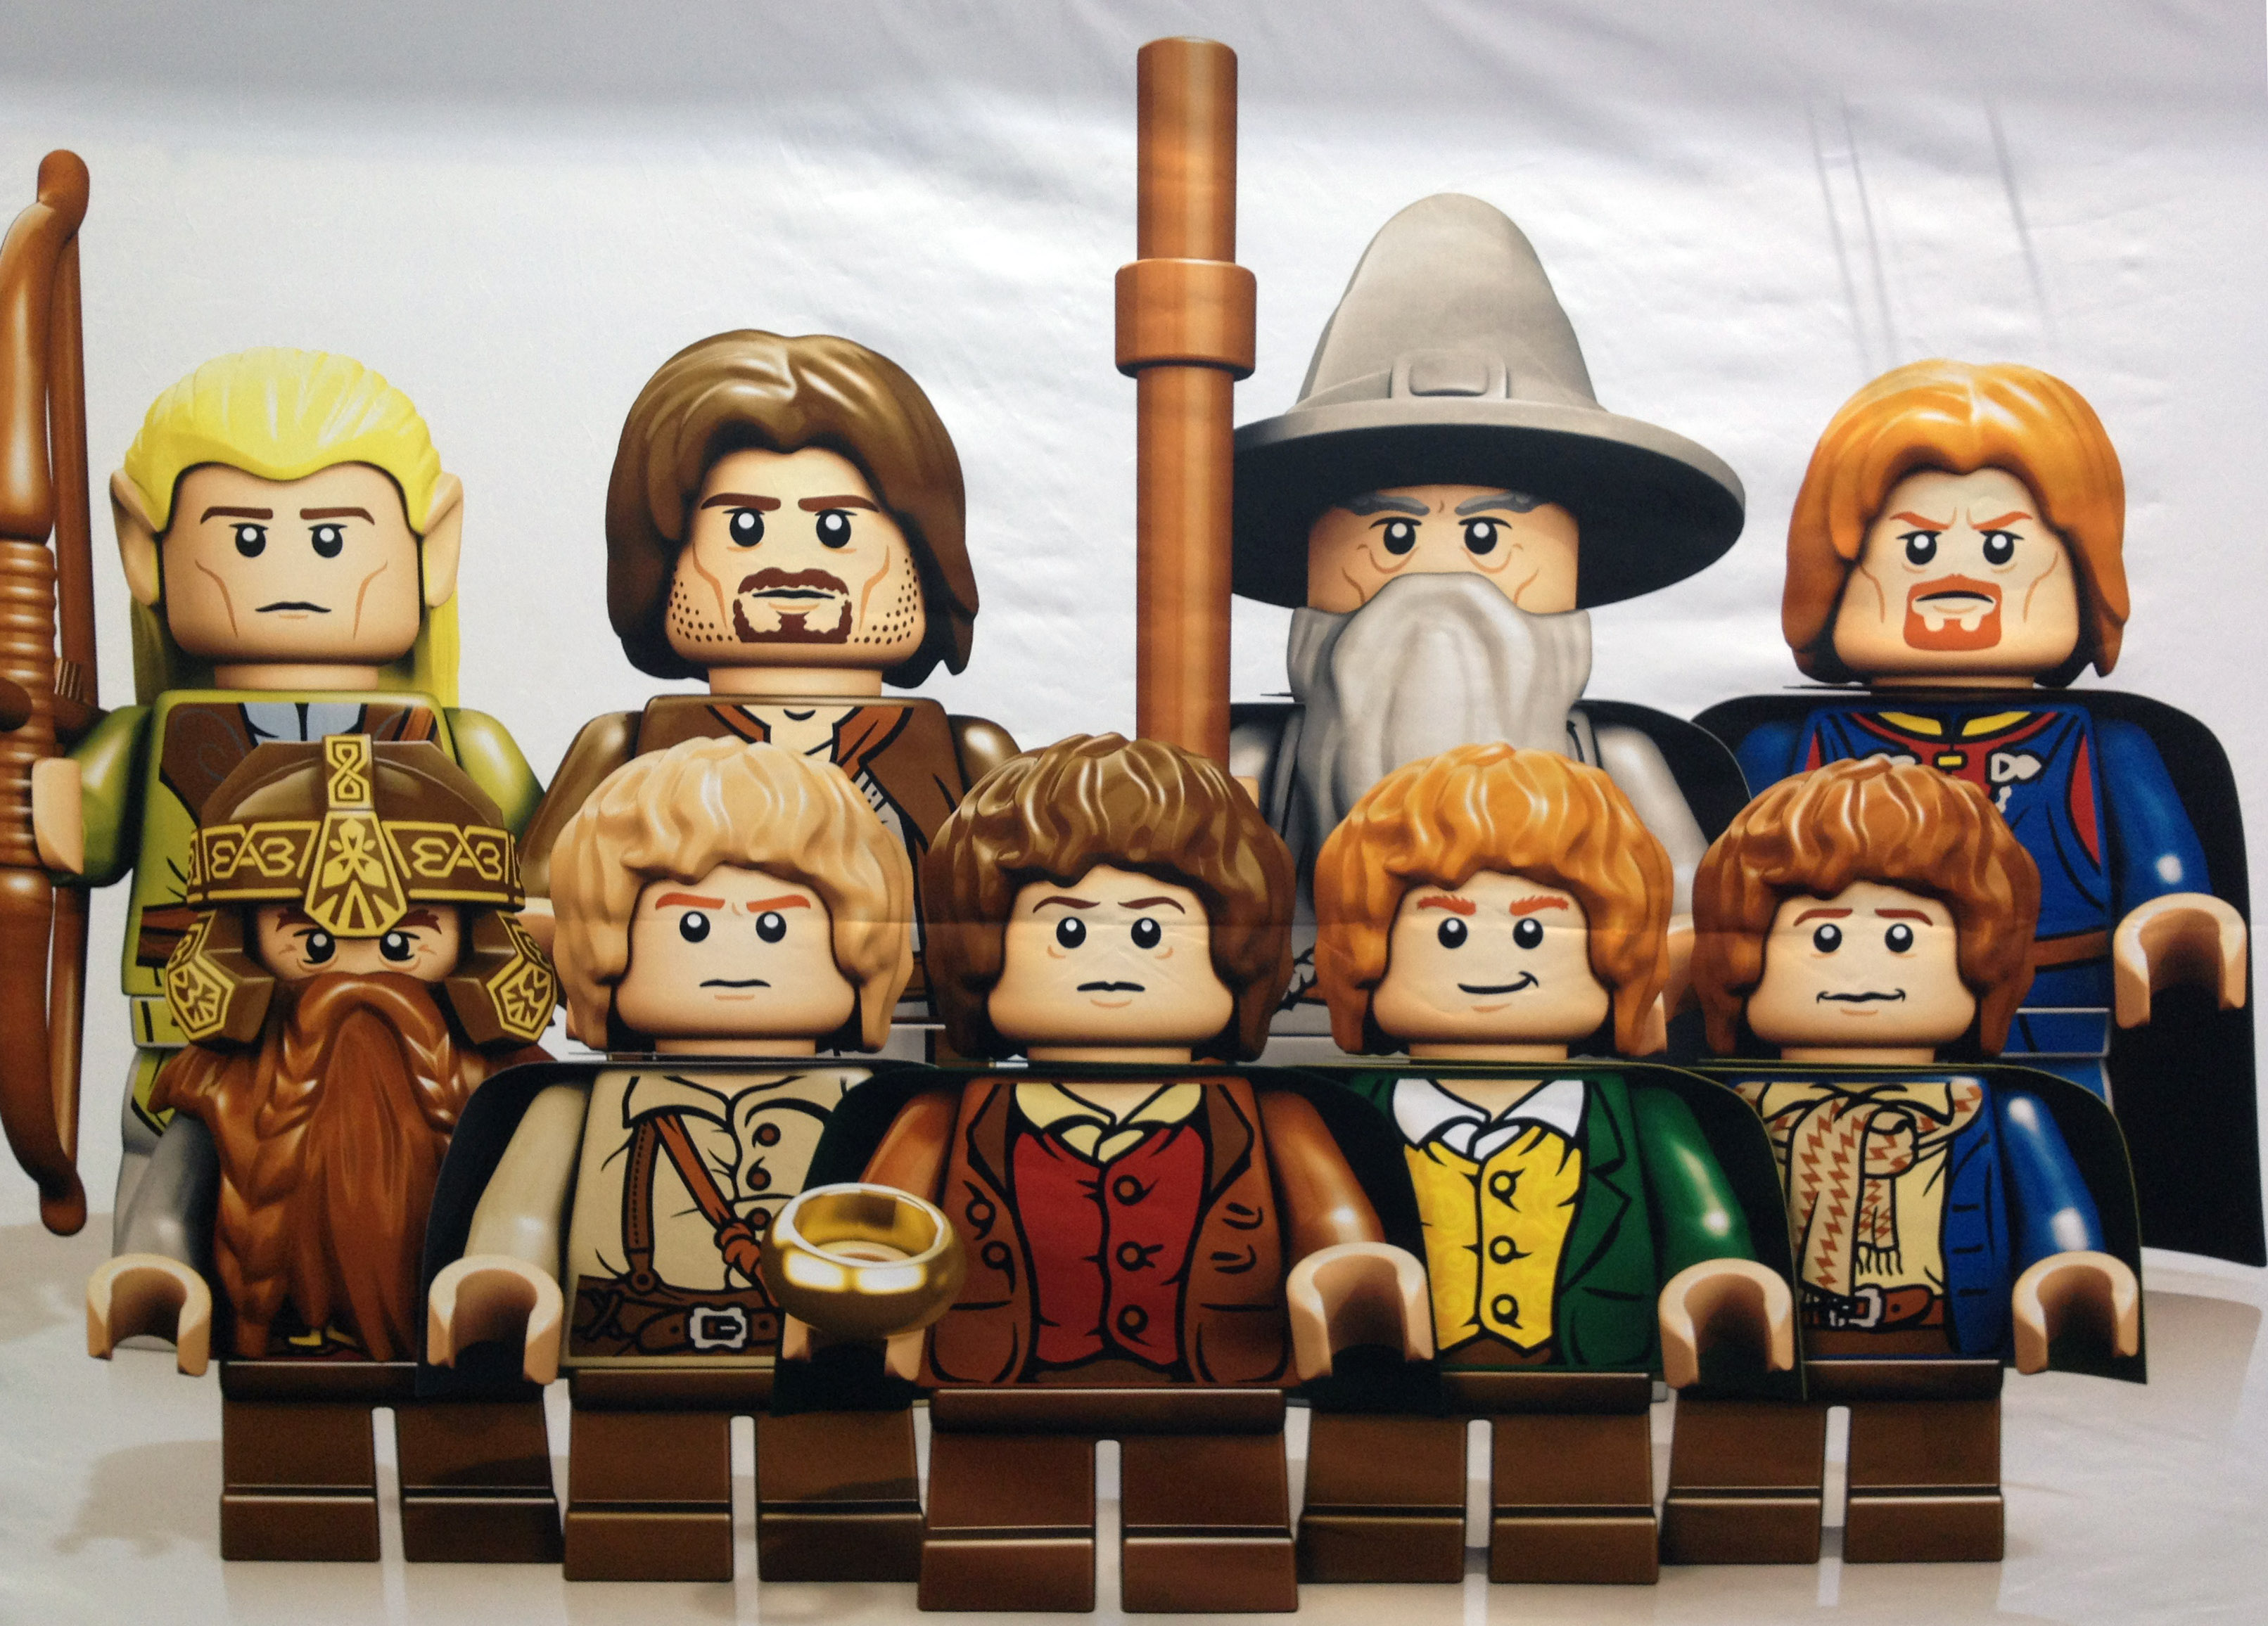 LEGO The Lord Of The Rings Pics, Video Game Collection